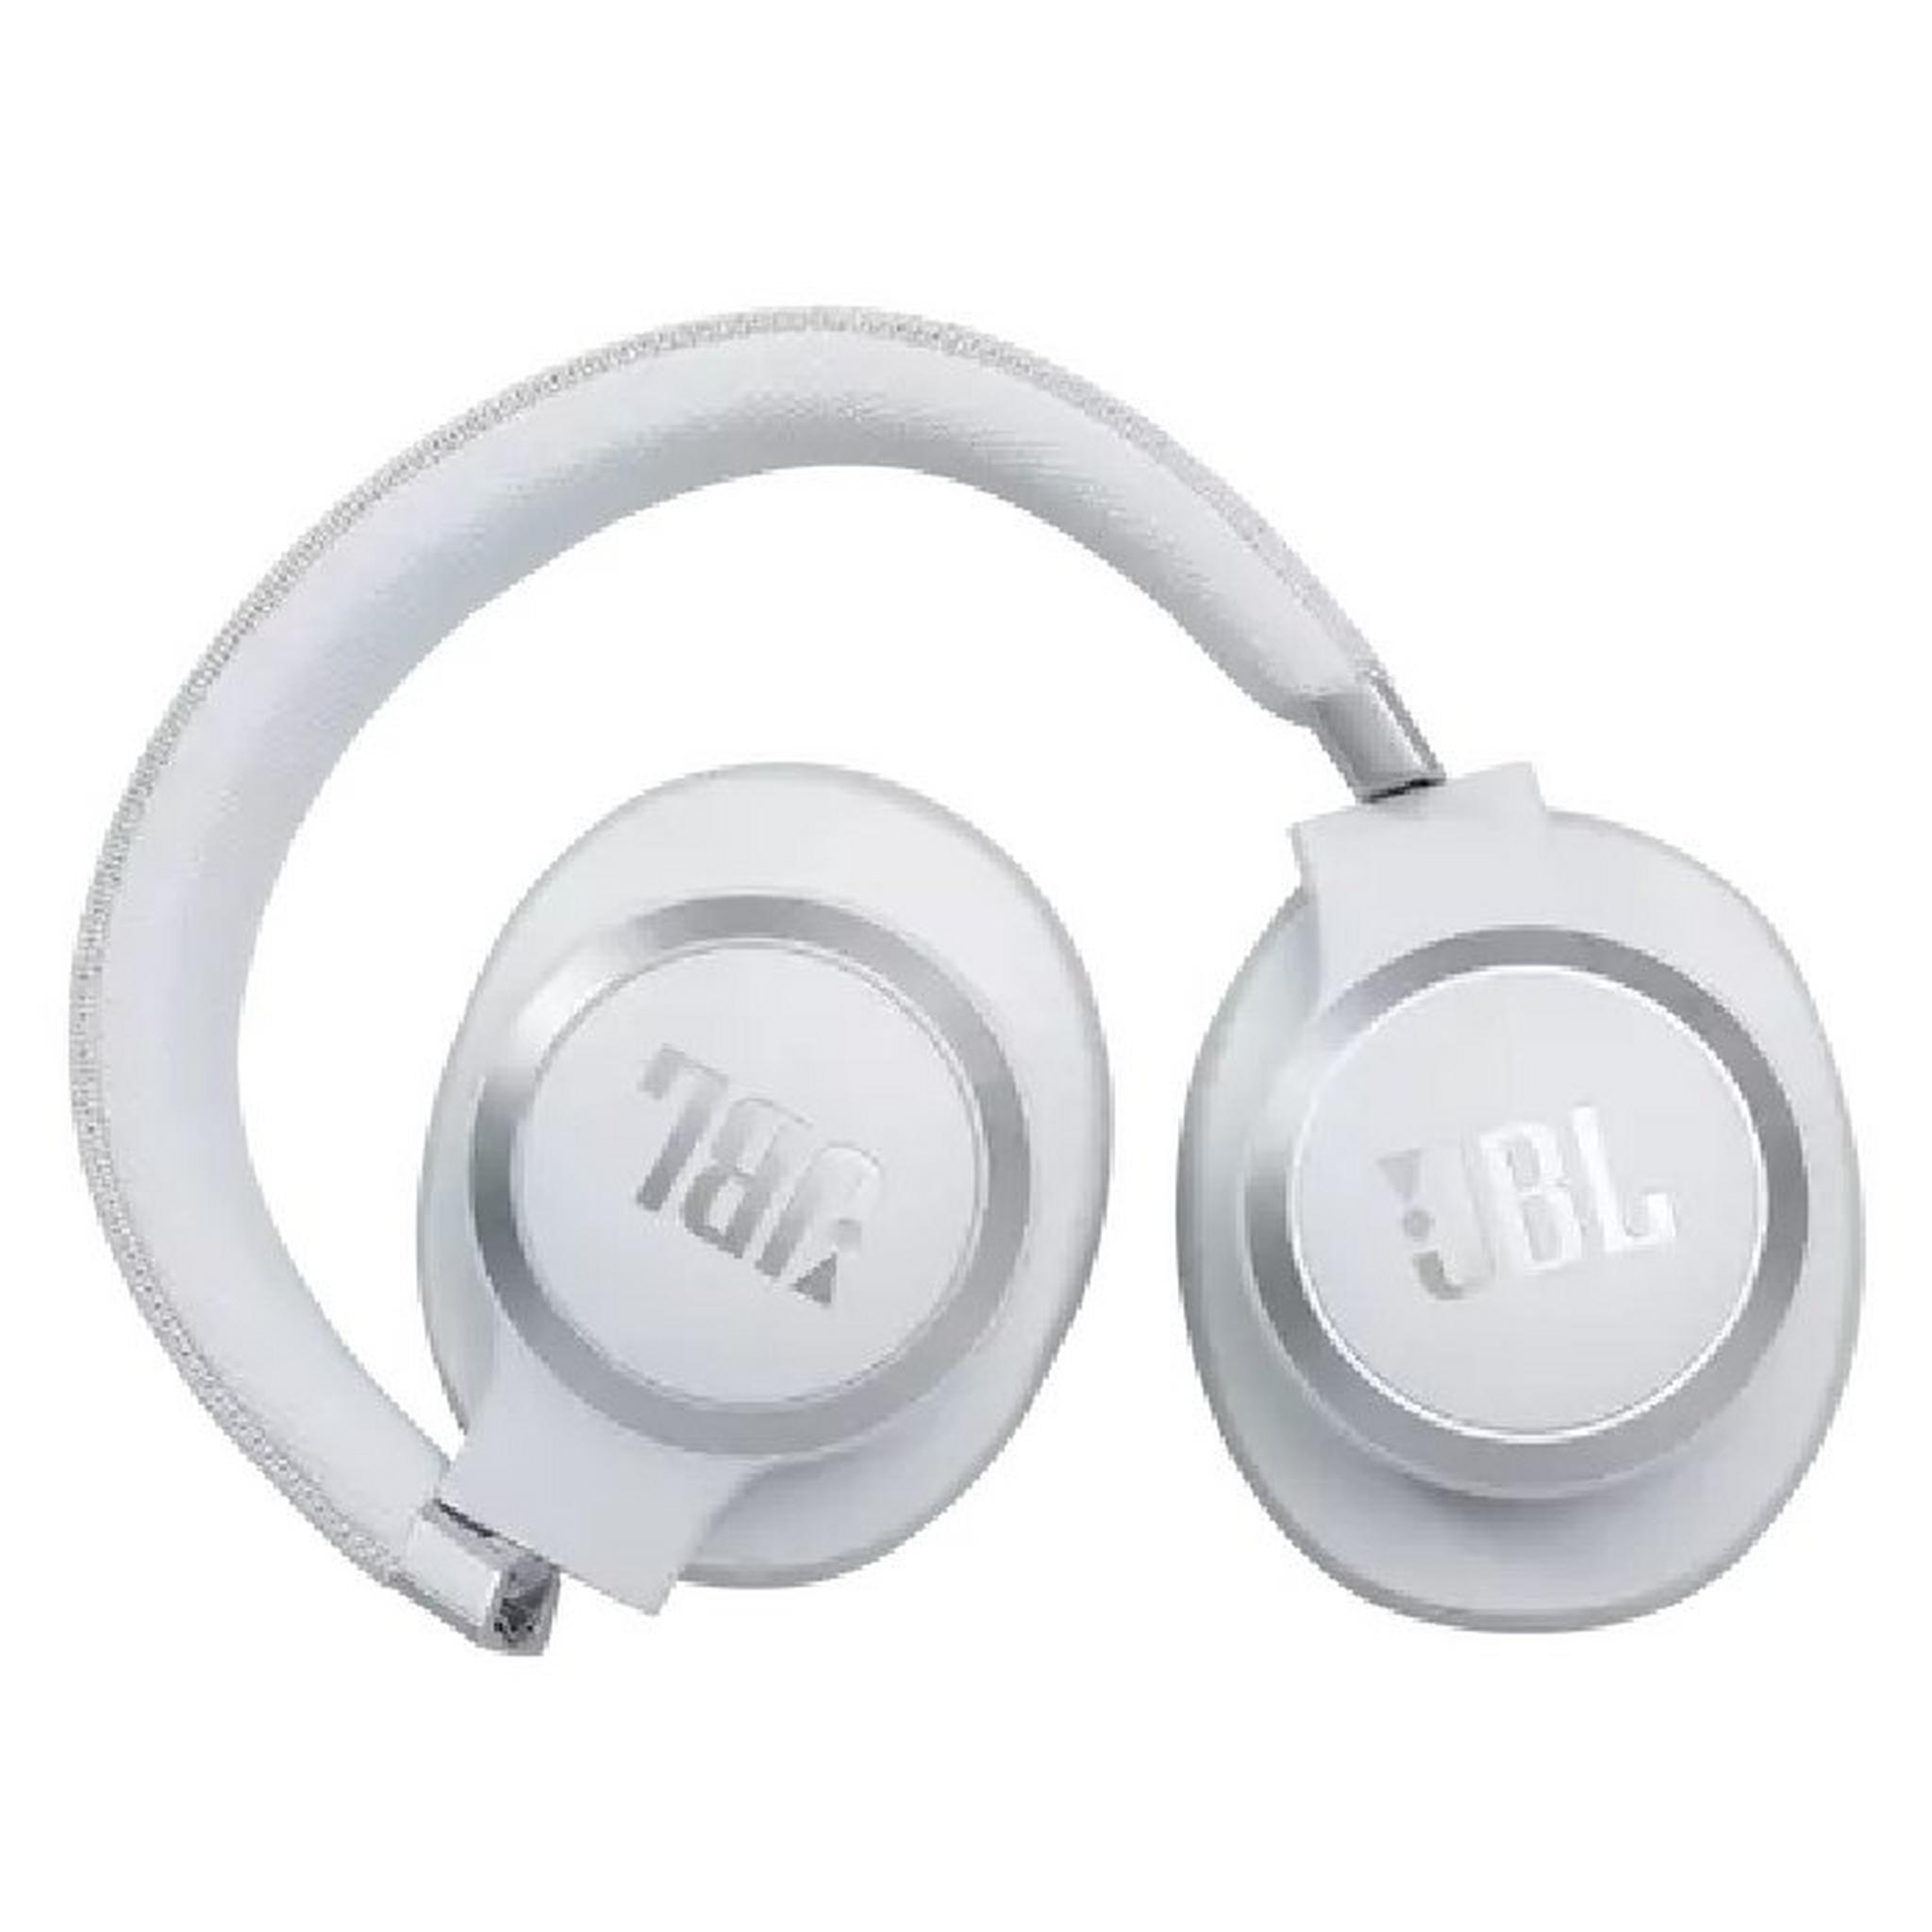 JBL Live 660 Wireless Noise Cancelling Headphones - White